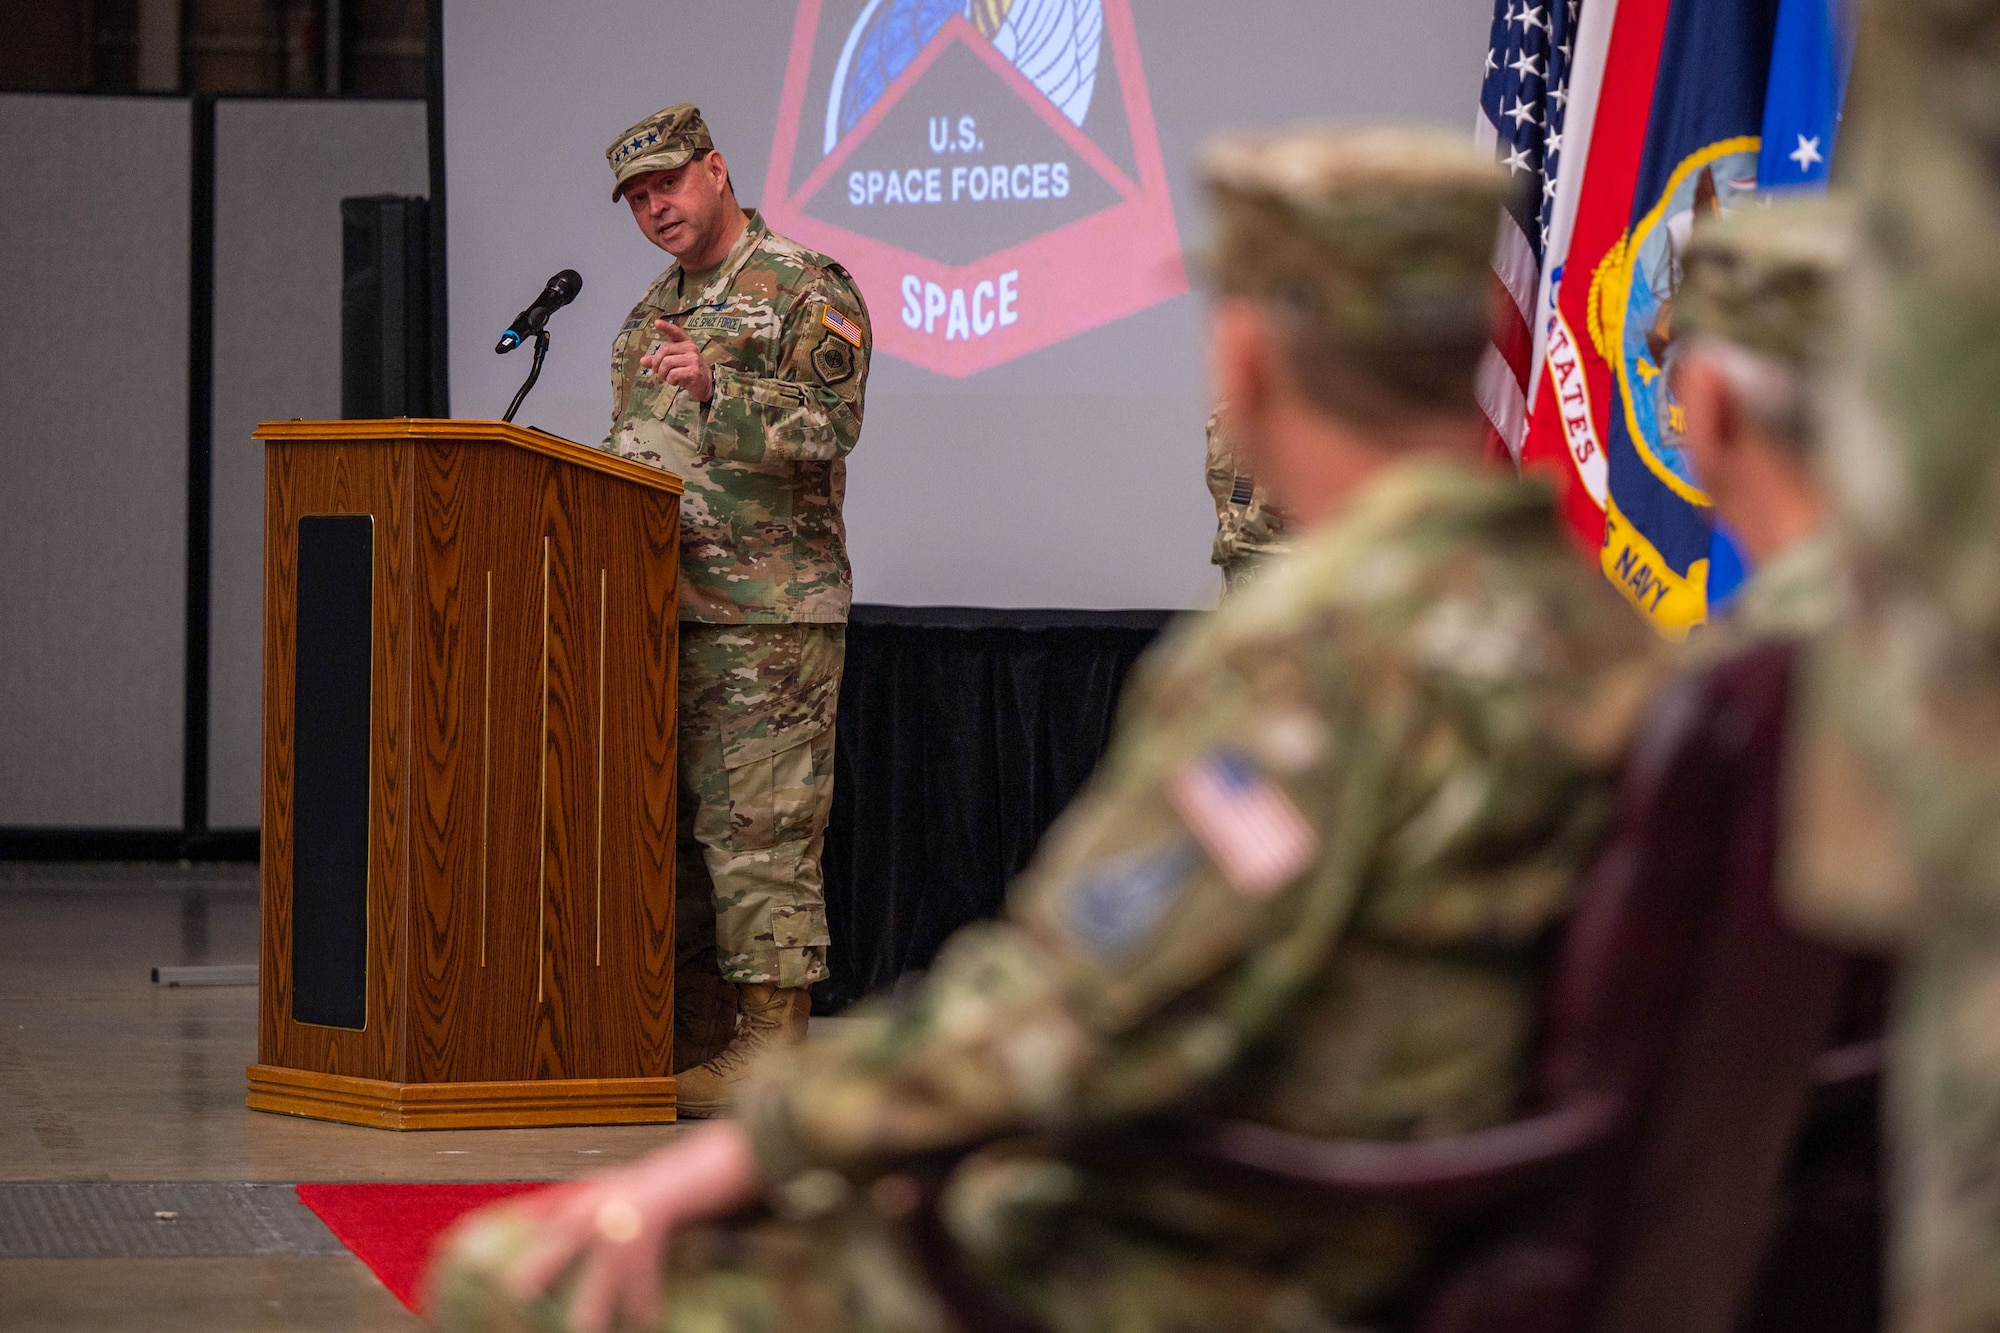 U.S. Space Force Chief of Space Operations Gen. Chance Saltzman speaks during the activation ceremony of U.S. Space Forces-Space (S4S) at Vandenberg Space Force Base, Calif., Jan. 31, 2024. S4S is a Space Force Component Field Command directly subordinate to the CSO that is responsible for delivering combat relevant space effects to the joint warfighter. (U.S. Space Force photo by Tech. Sgt. Luke Kitterman)